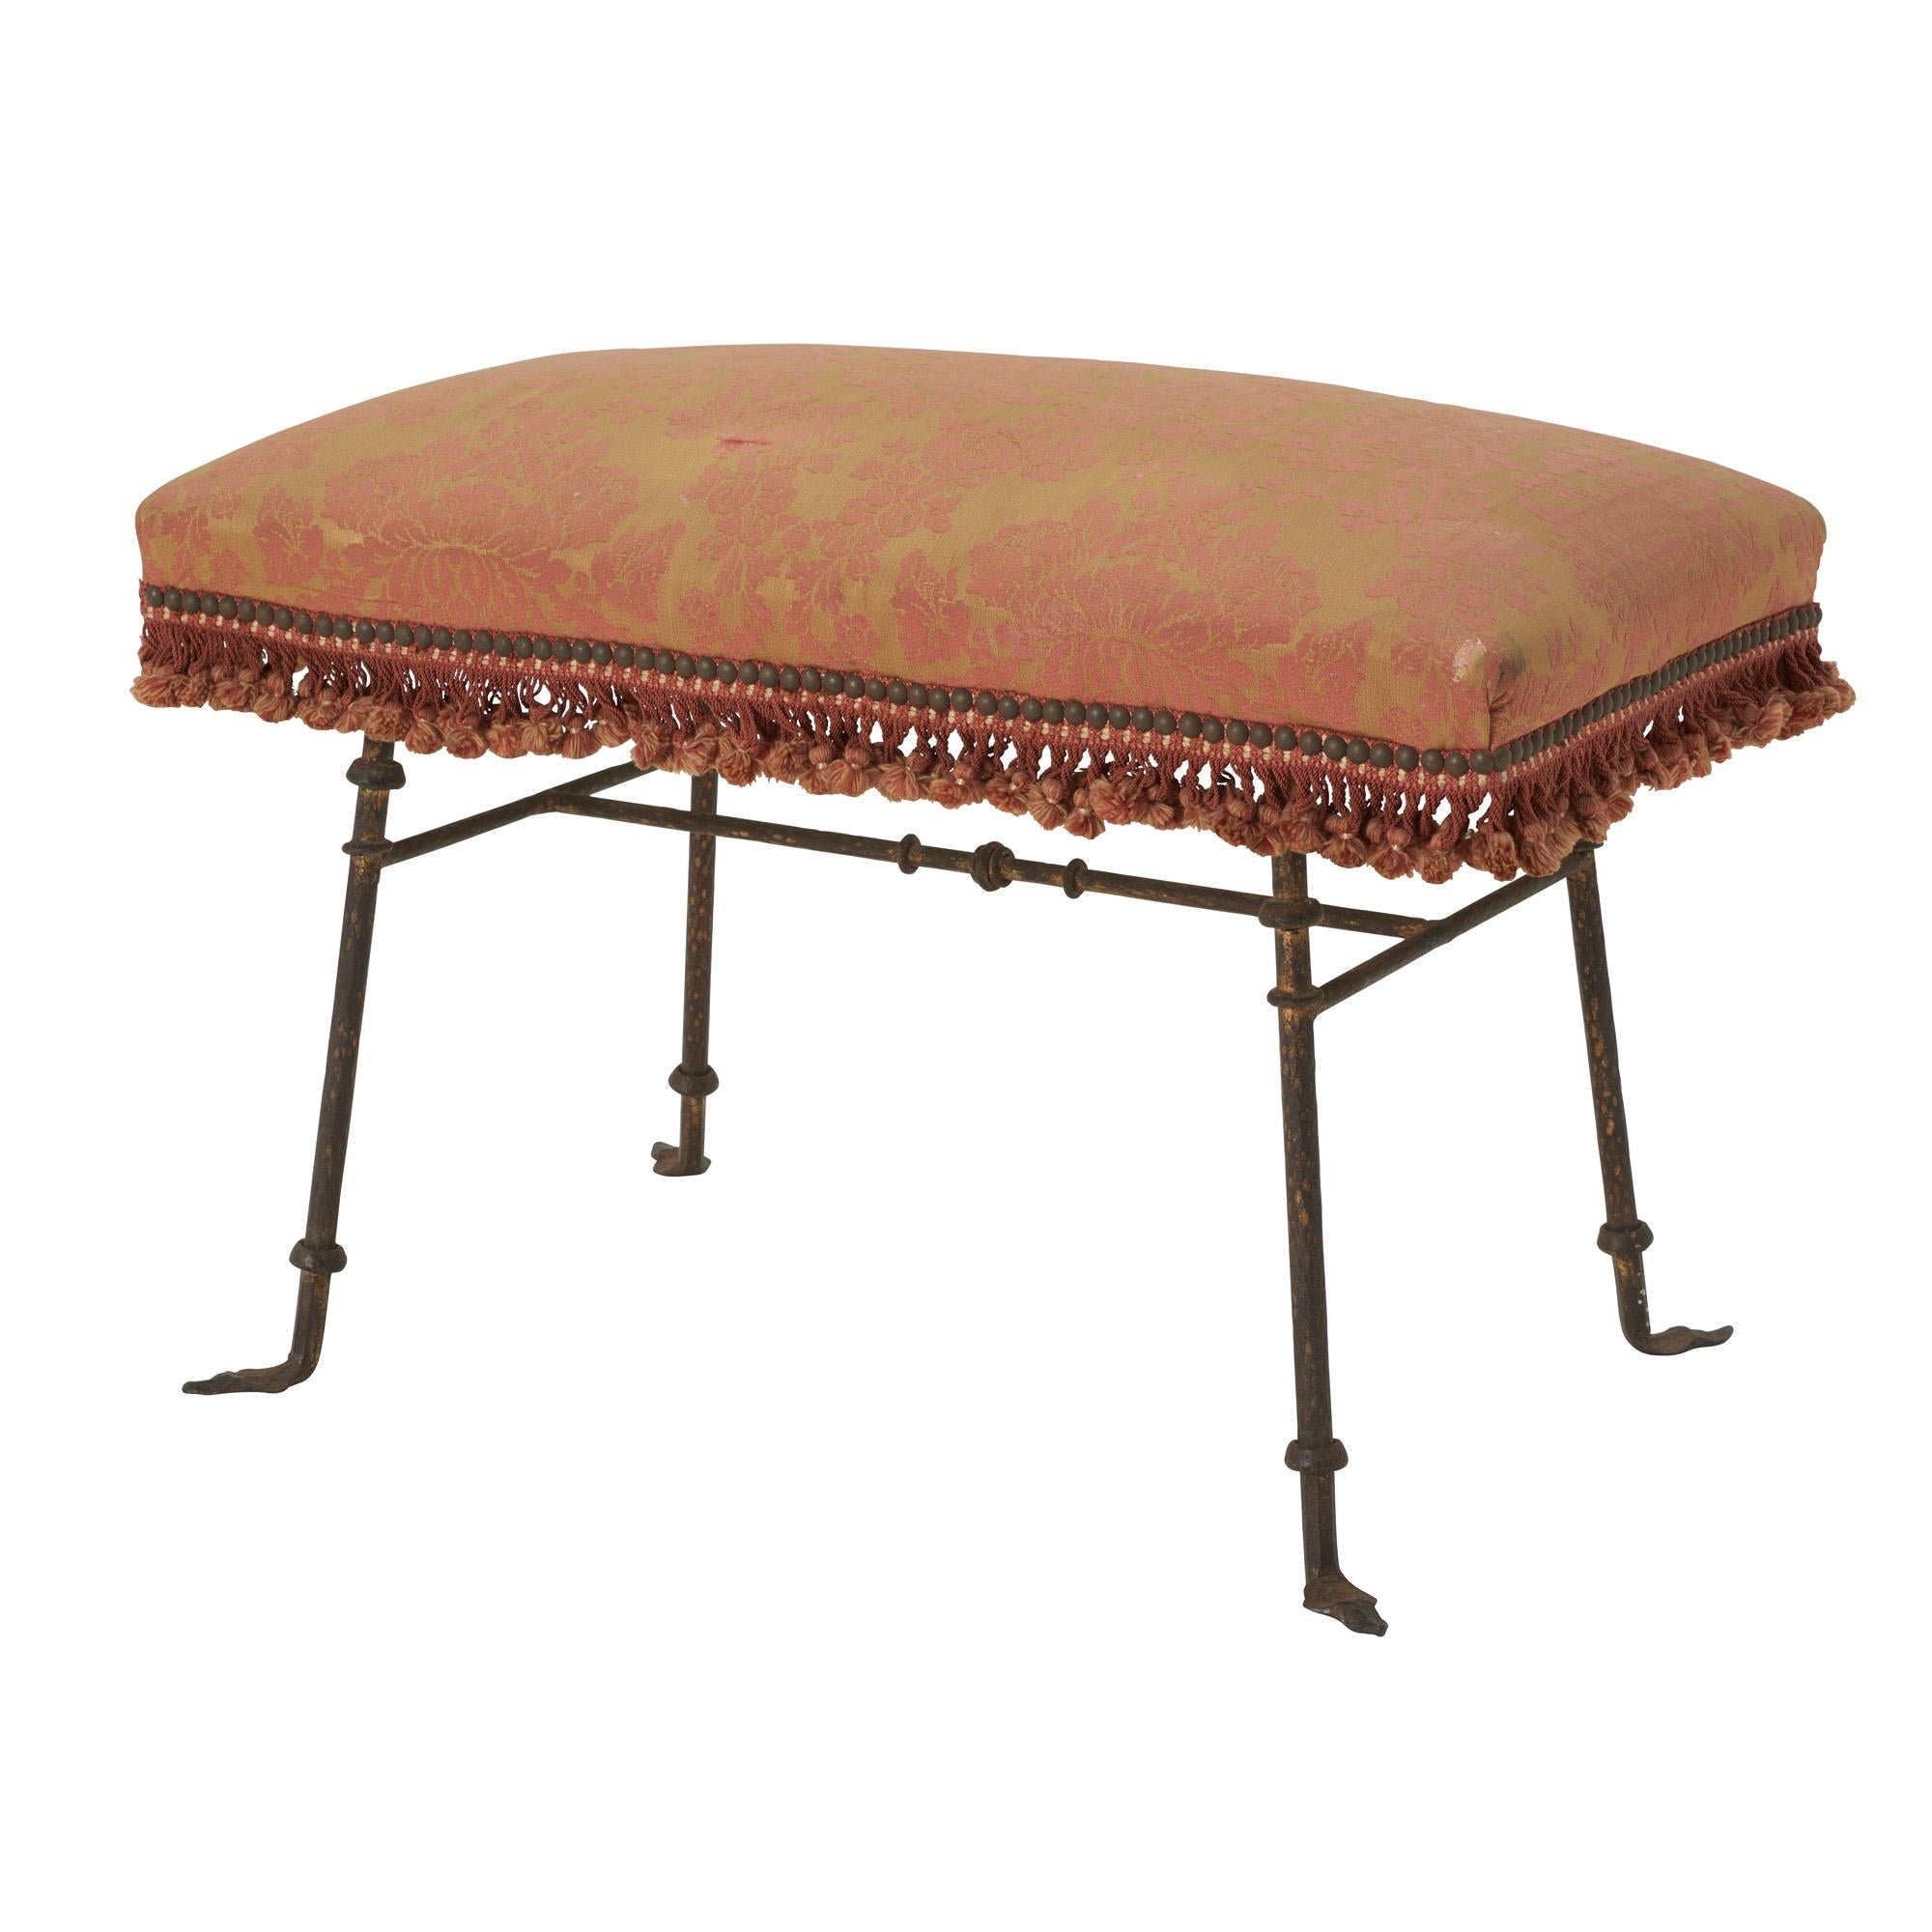 This Mid 20th Century Bench features a brass frame with a red/orange damask cushion and tassels.

Since Schumacher was founded in 1889, our family-owned company has been synonymous with style, taste, and innovation. A passion for luxury and an